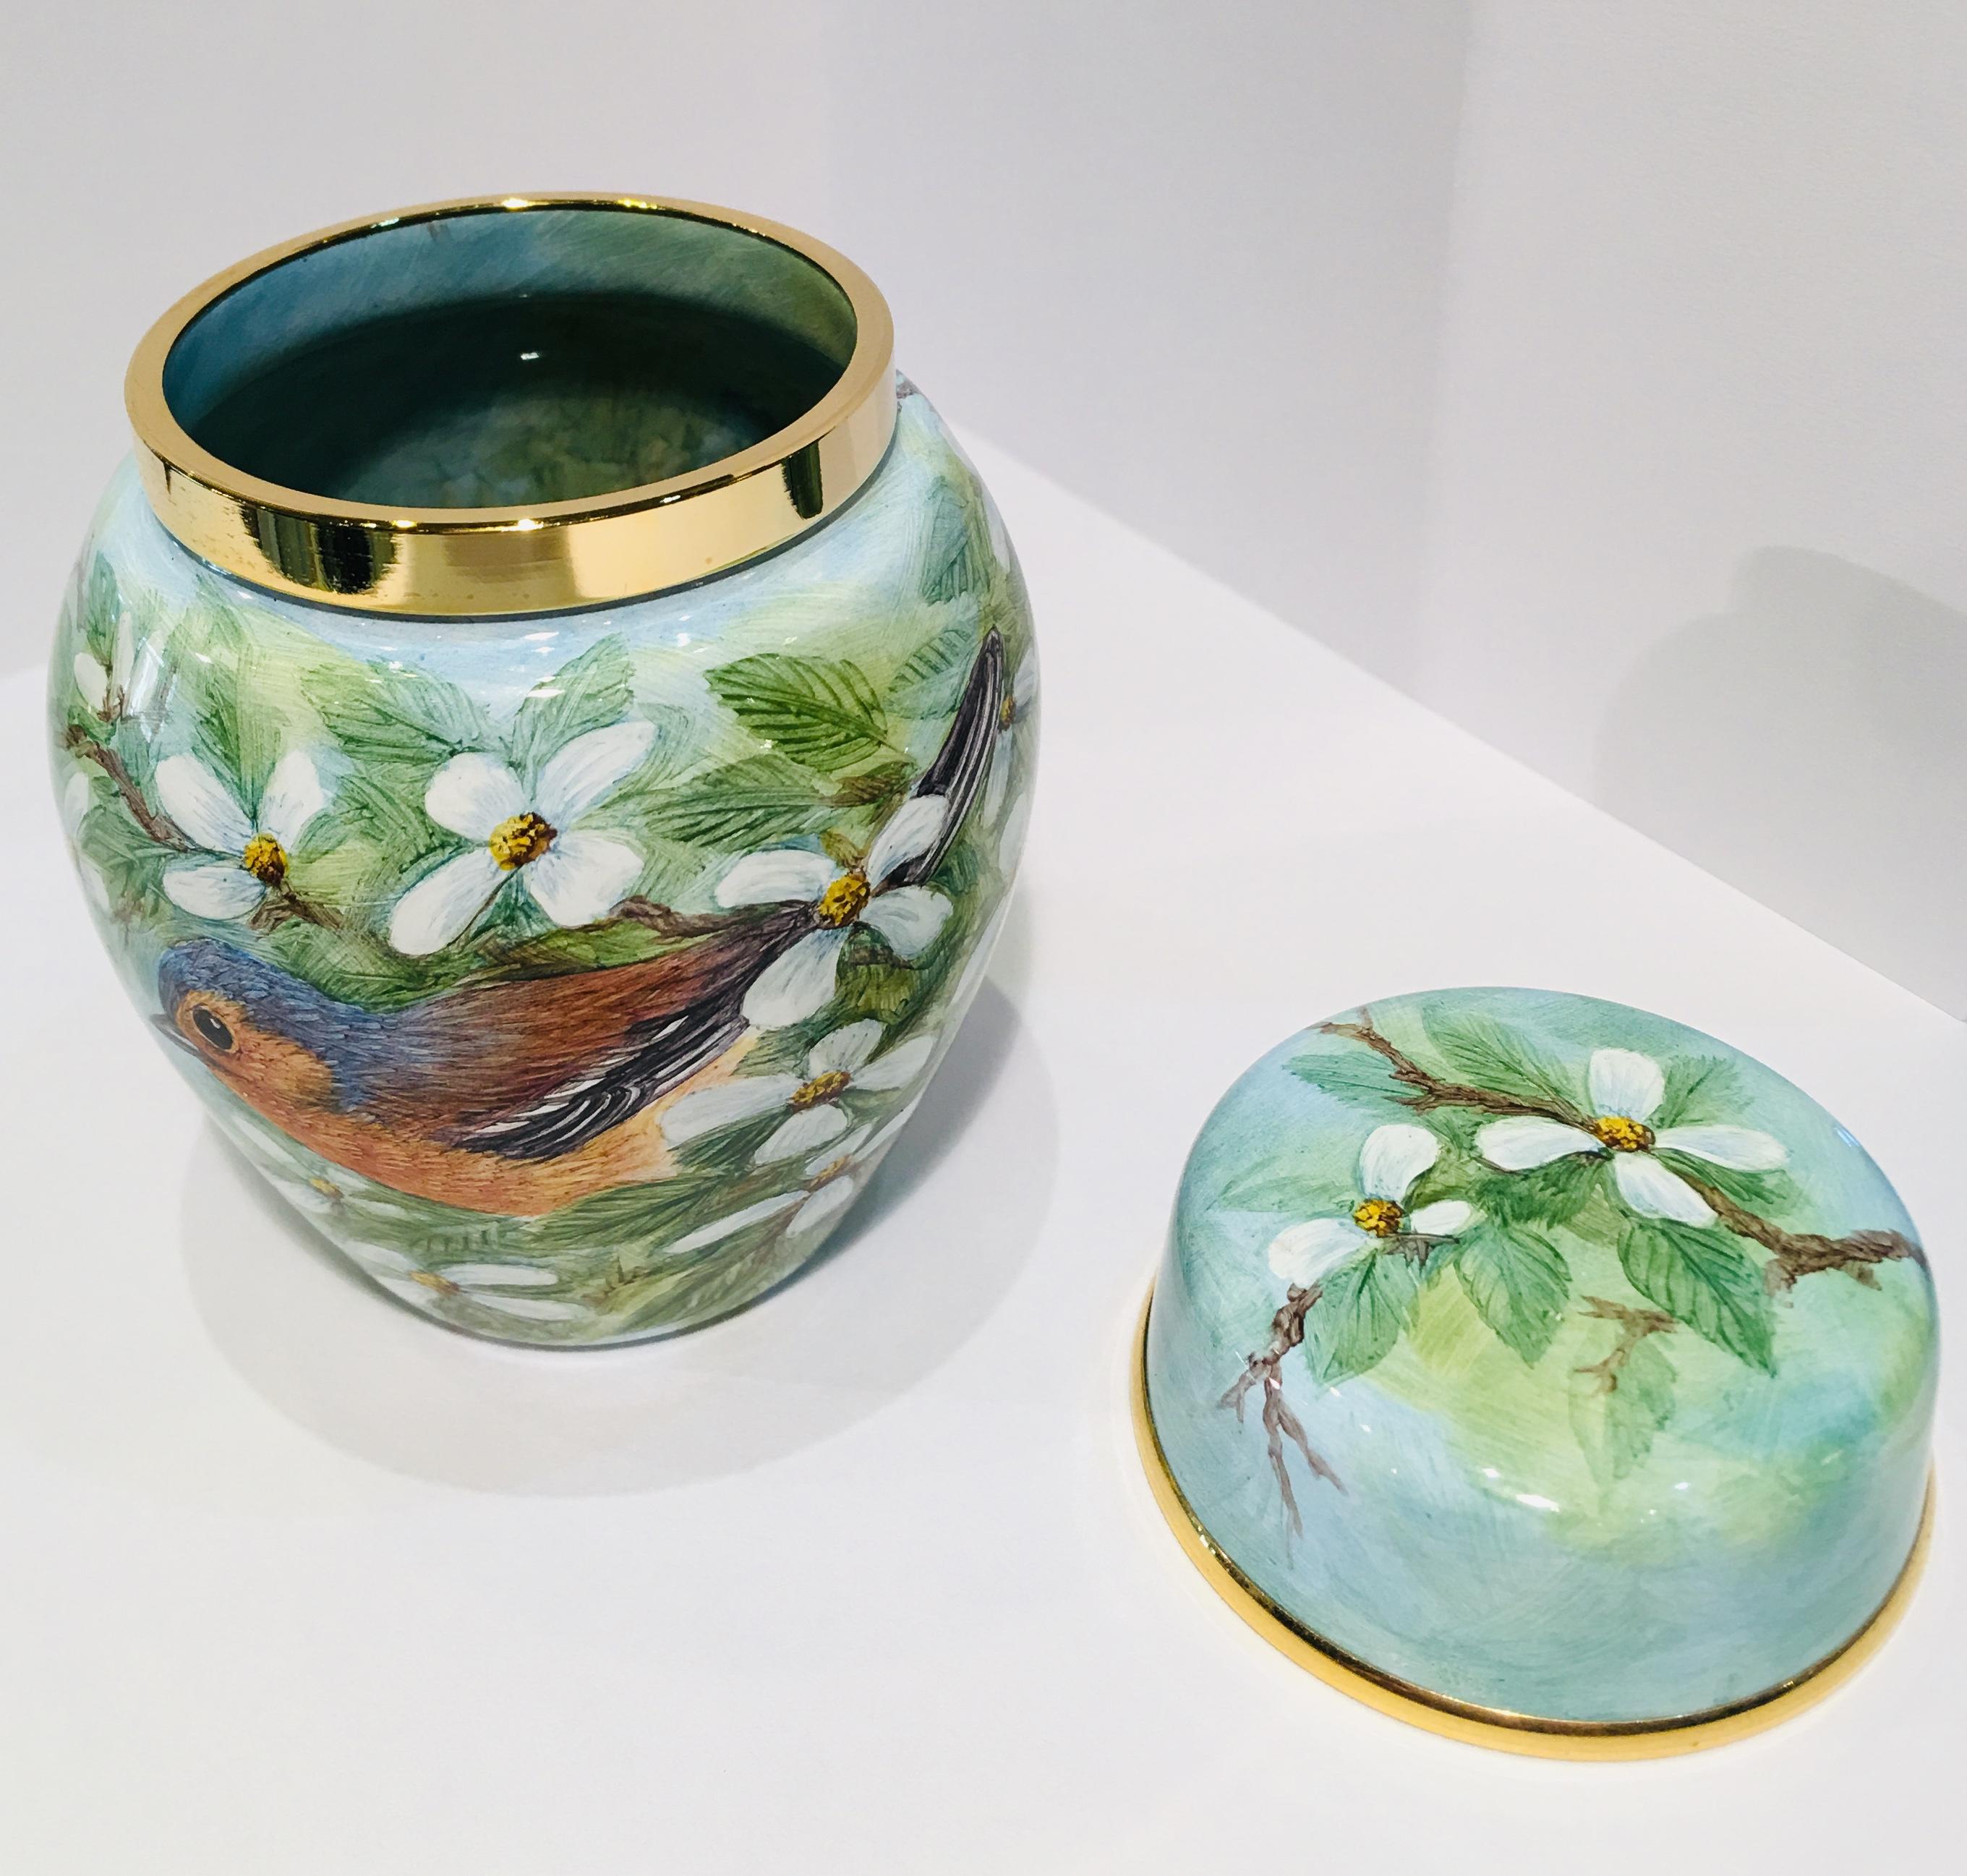 Finest quality handmade and hand painted enamel miniature ginger jar or lidded vase, in perfect condition, features a gilt metal rim and lid (also with gilt metal rim) made by Moocroft.  Limited edition of only 75 pieces made.  Outside of jar